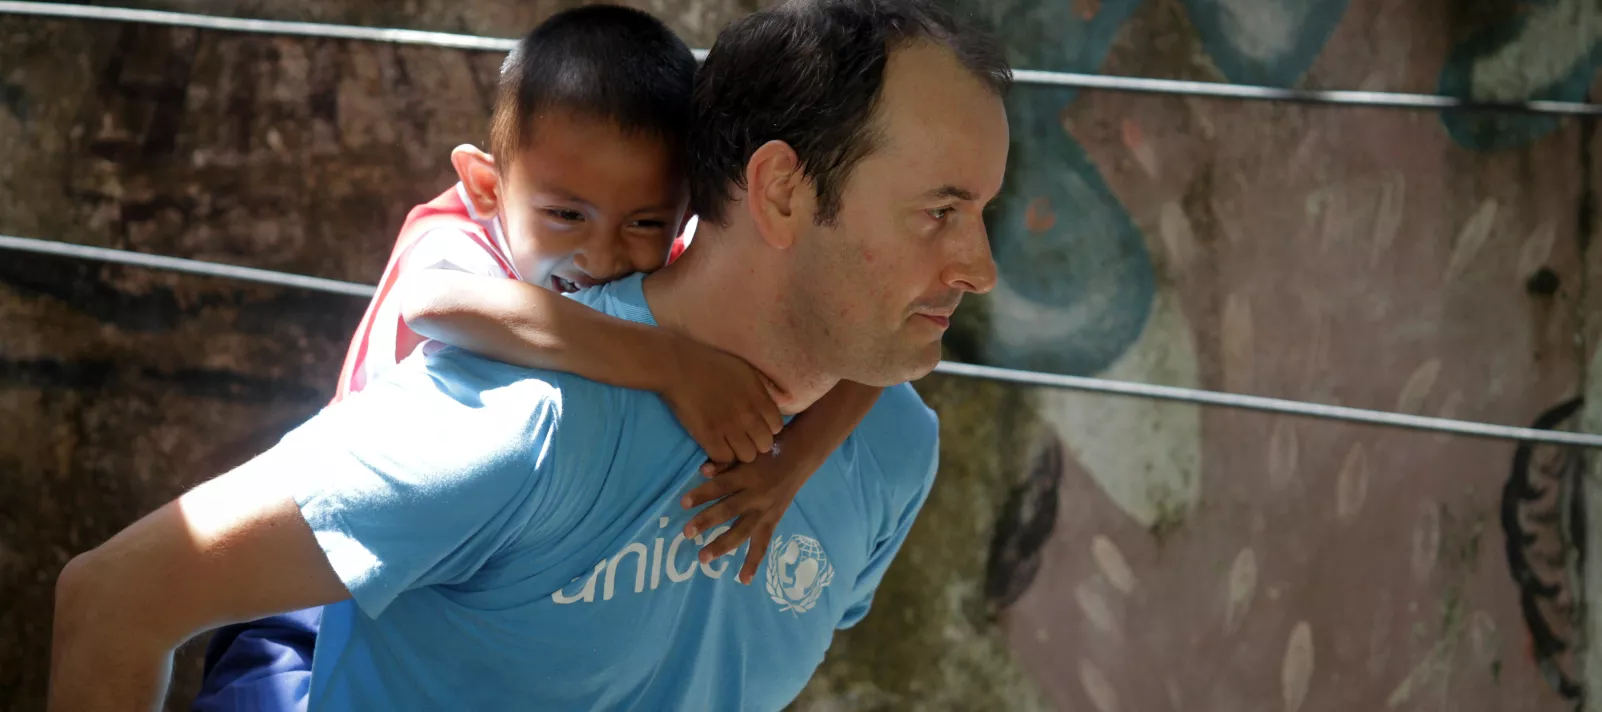 A male UNICEF officer is piggybacking a young boy.